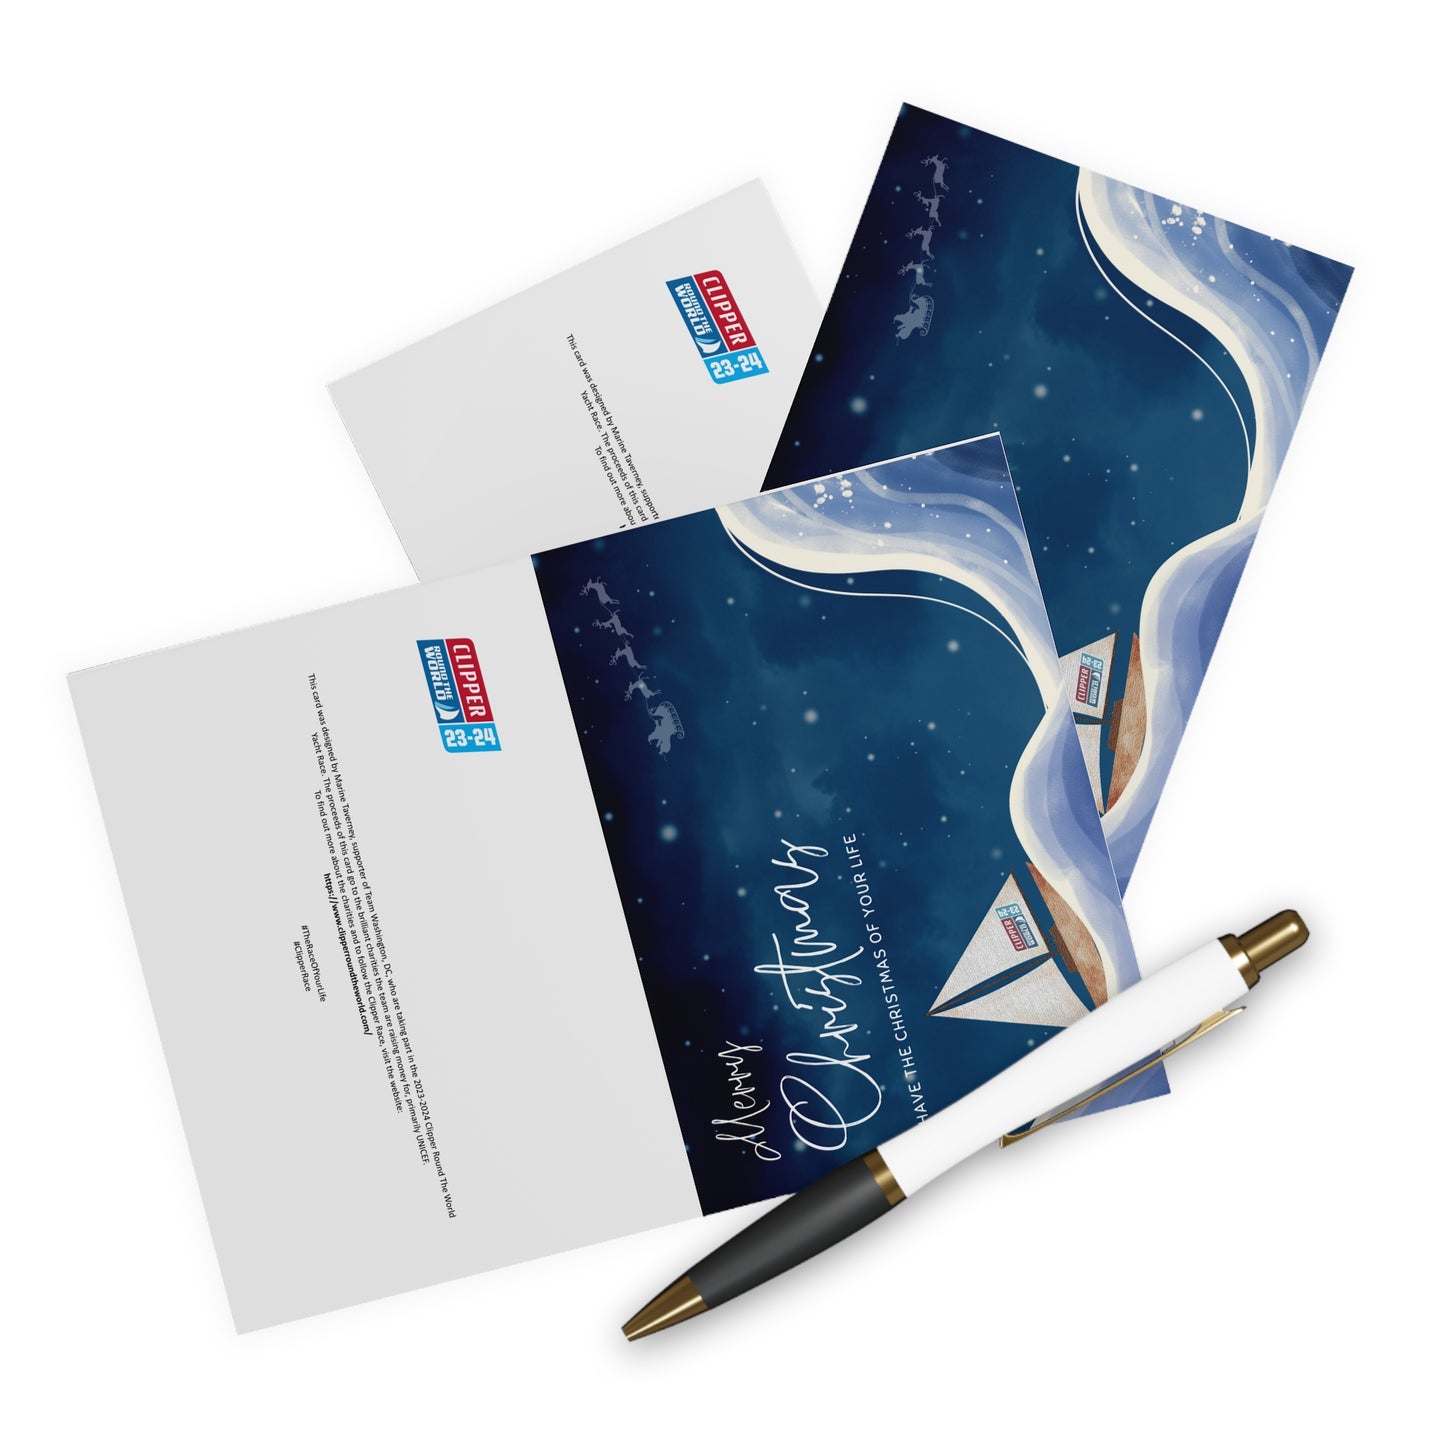 Clipper branded Charity Christmas Cards (5 Pack)